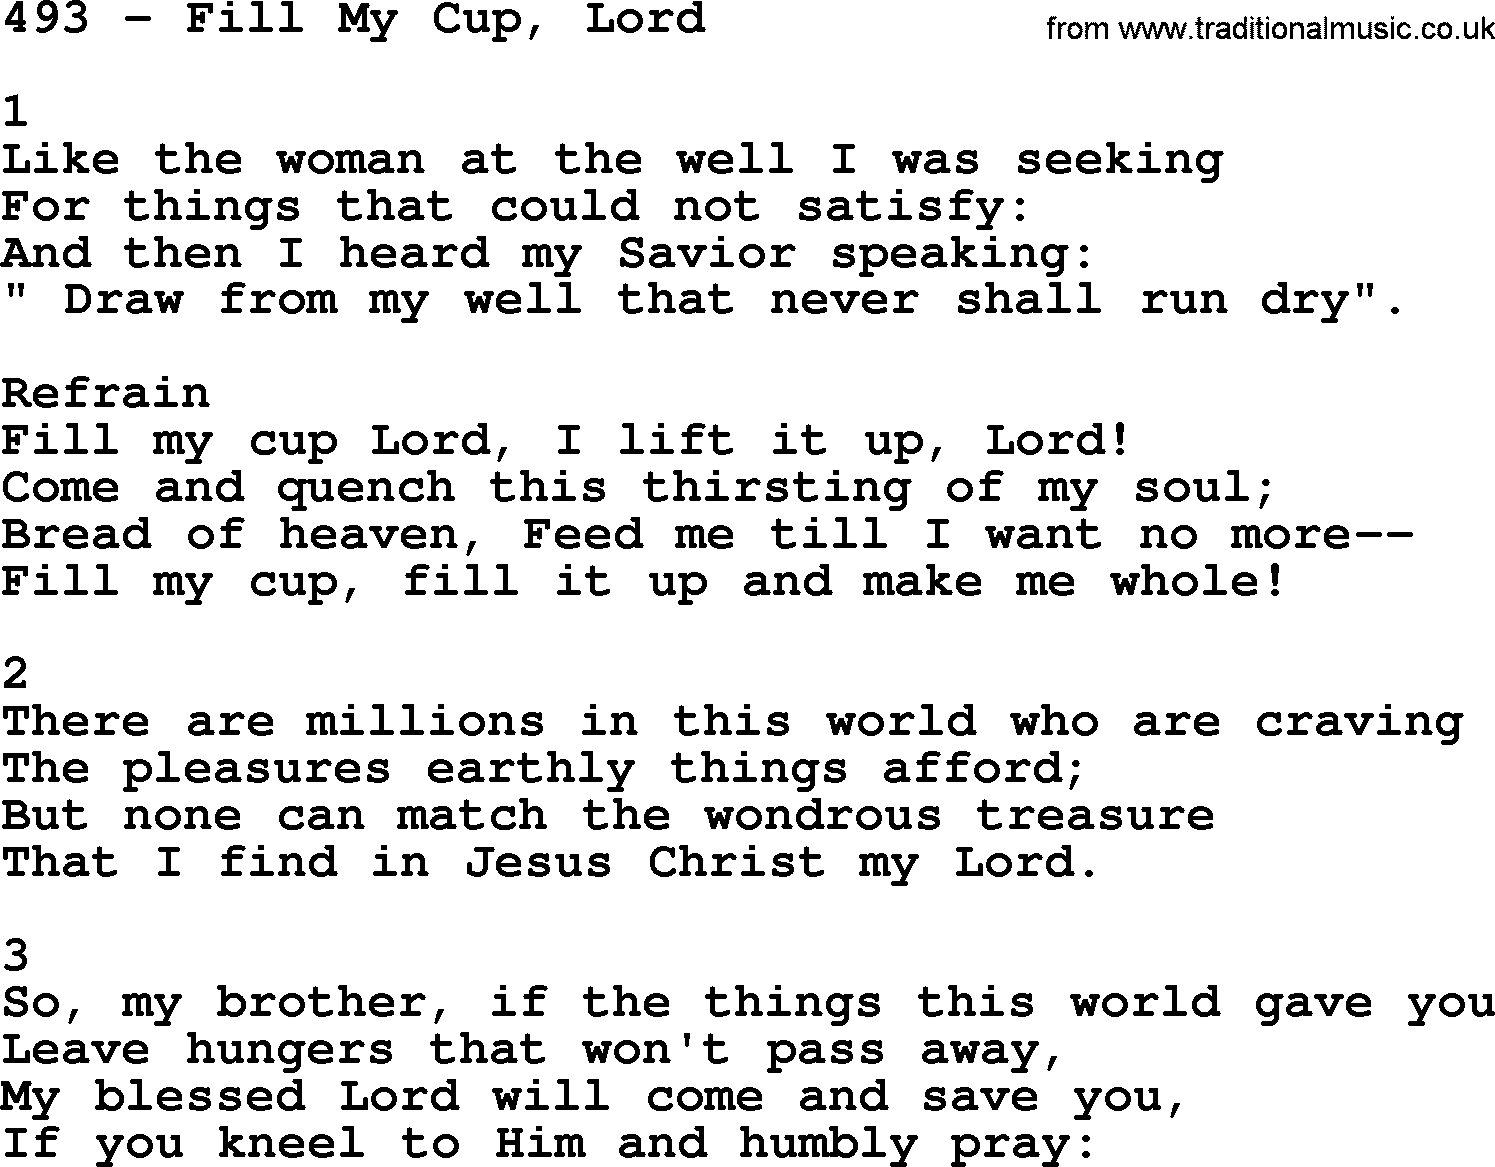 Complete Adventis Hymnal, title: 493-Fill My Cup, Lord, with lyrics, midi, mp3, powerpoints(PPT) and PDF,